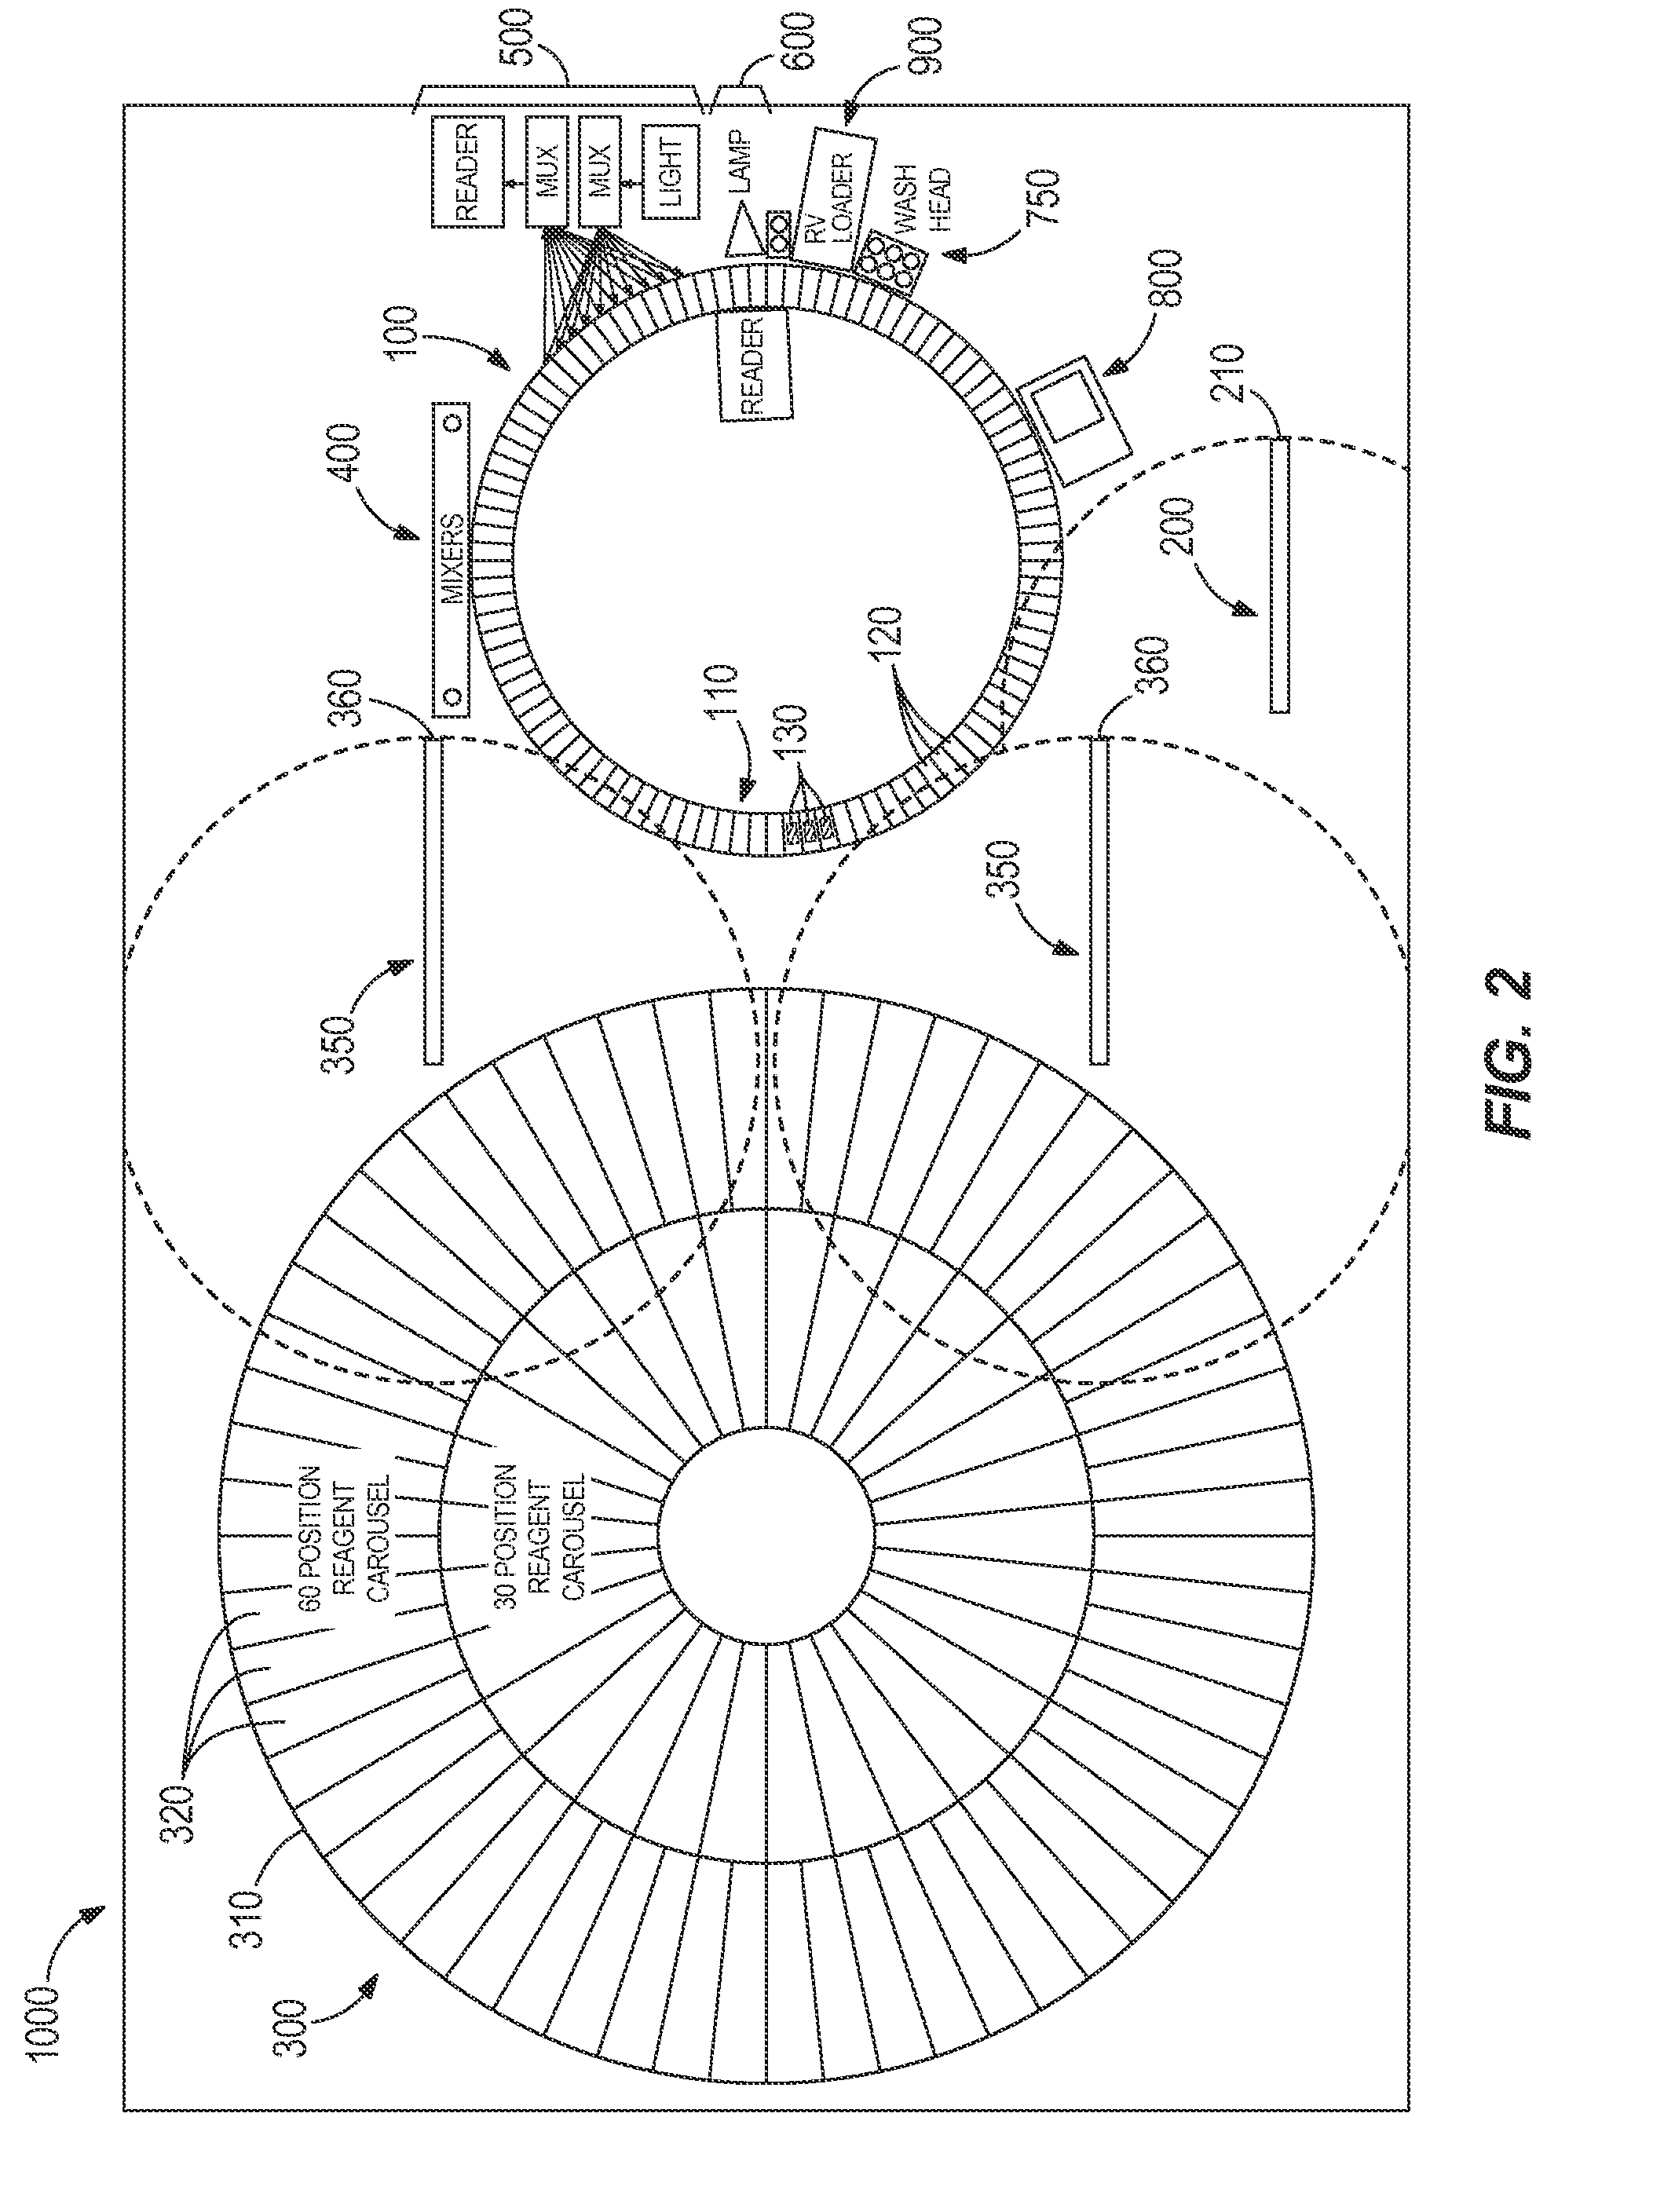 System and Method for Processing Both Clinical Chemistry and Immunoassay Tests